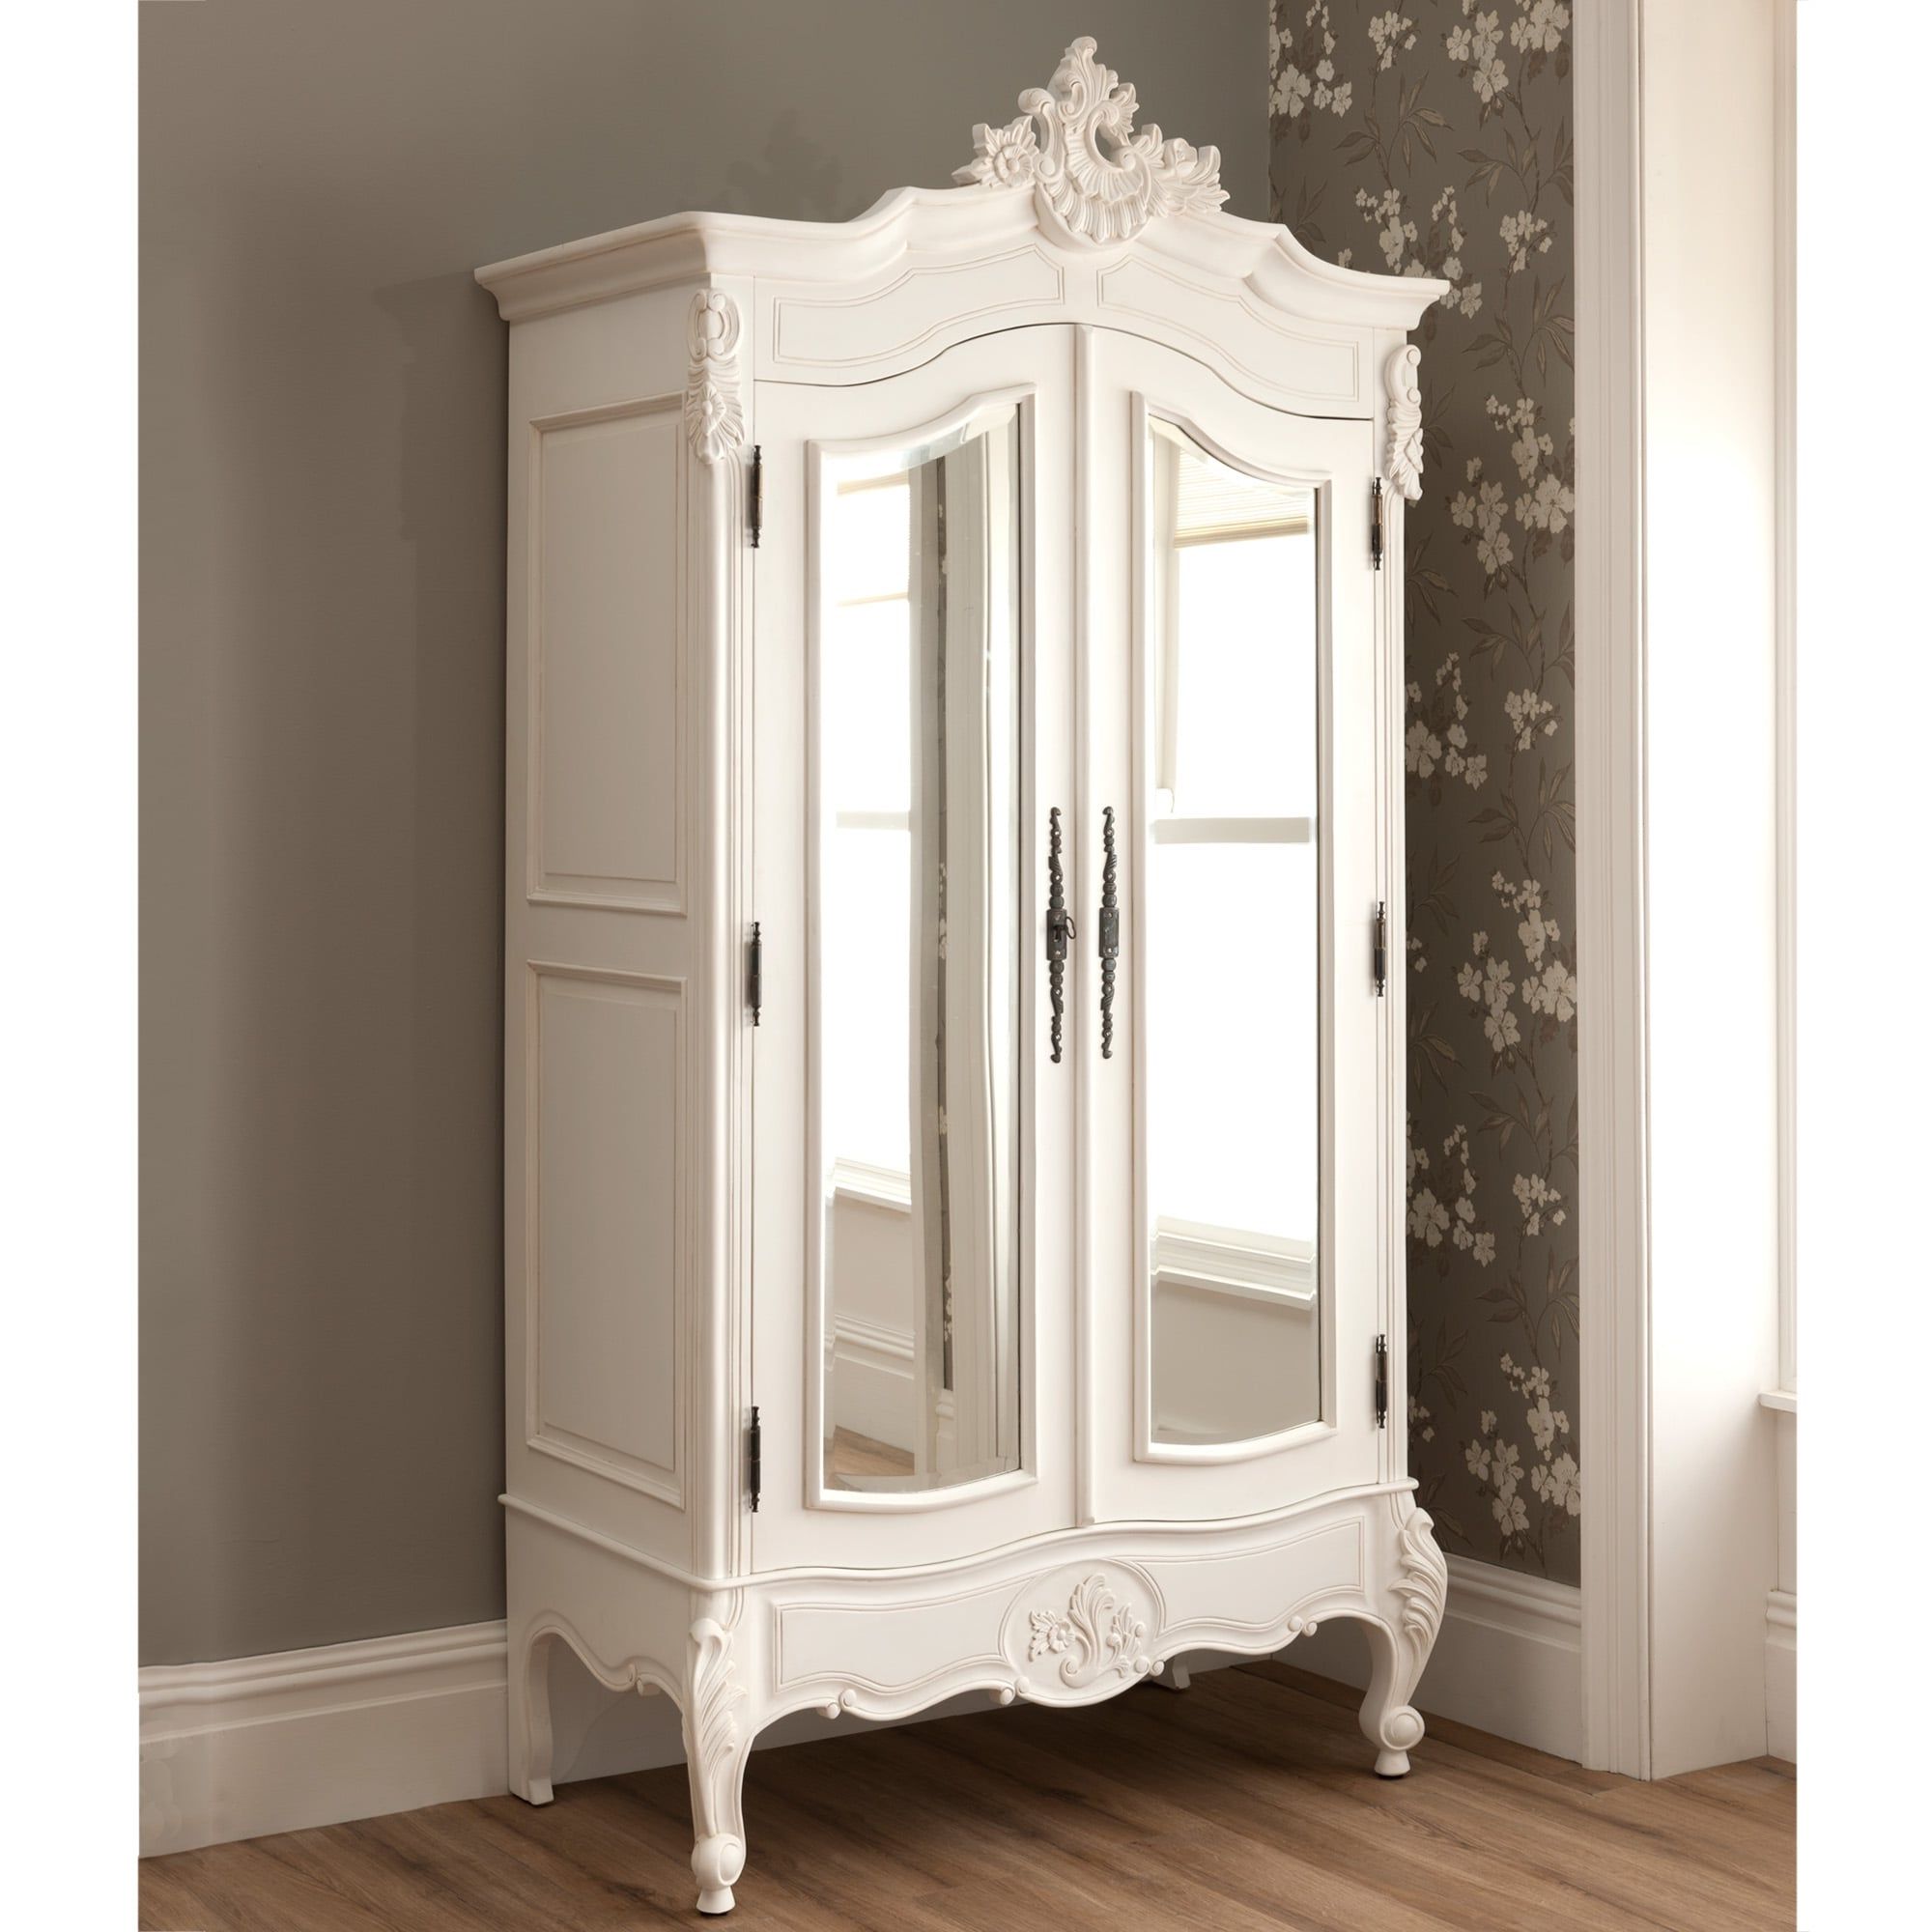 La Rochelle Antique French Mirrored 2 Door Wardrobe Intended For French White Wardrobes (Gallery 2 of 20)